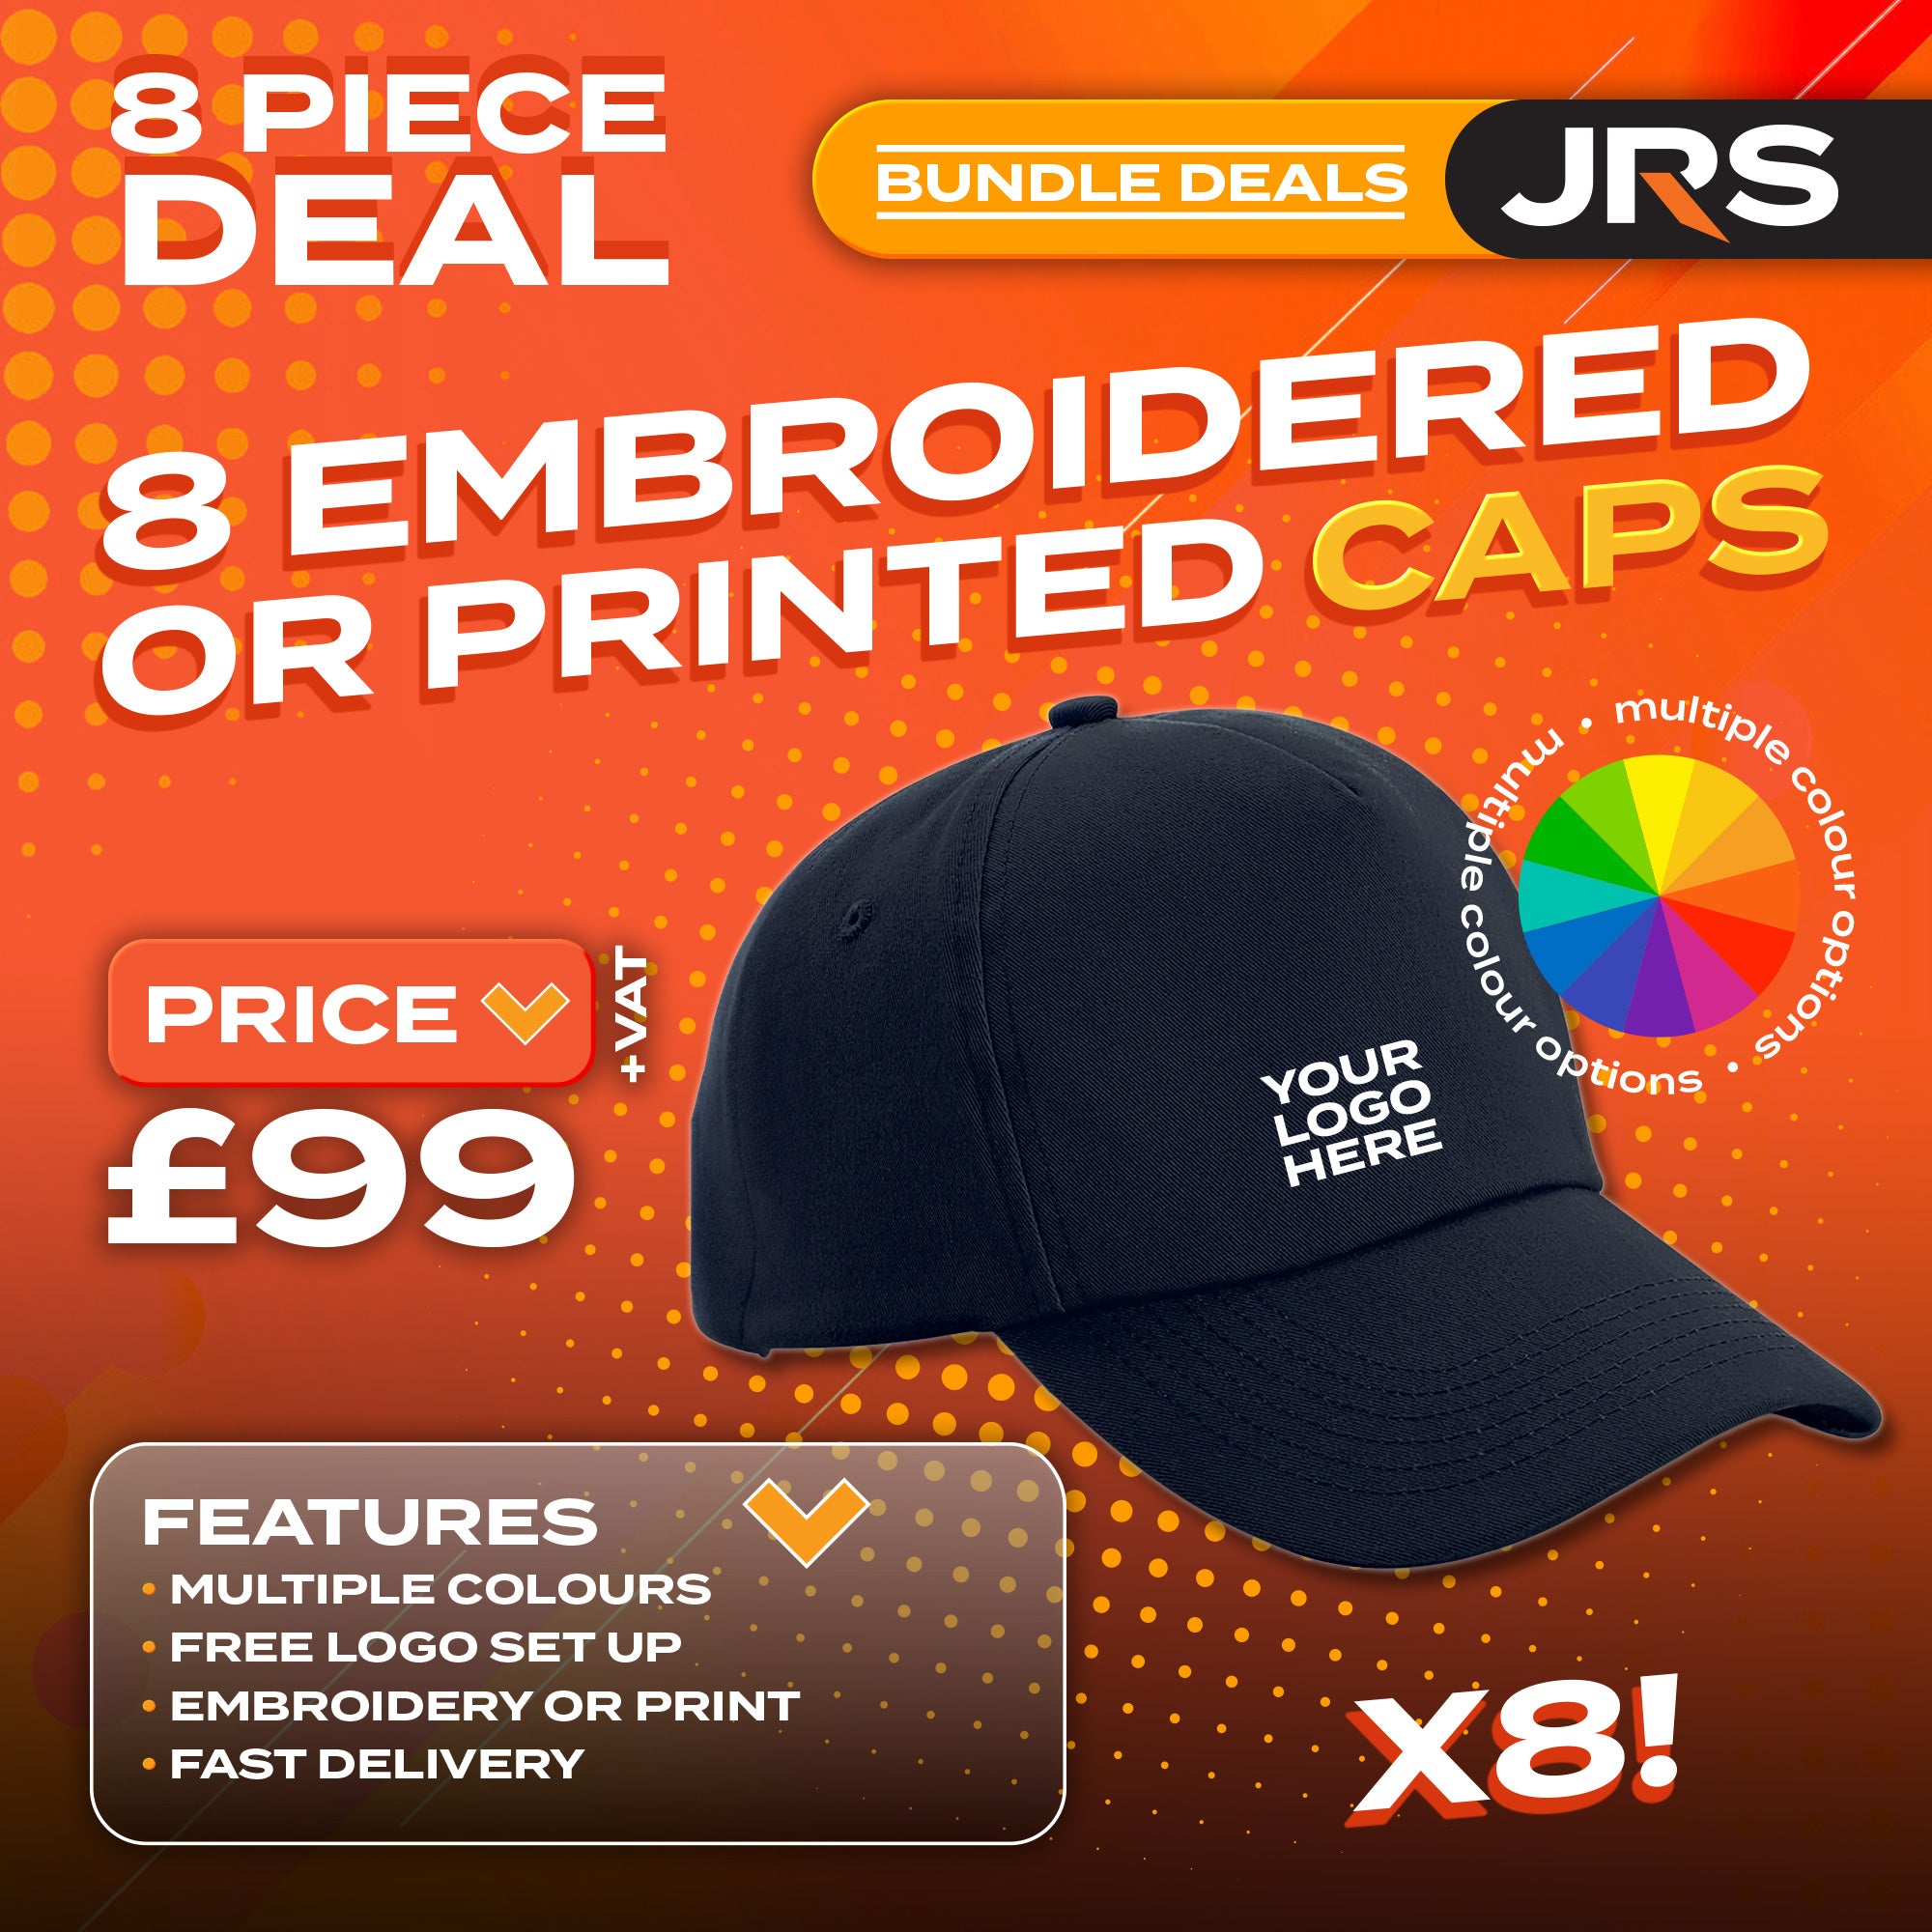 8x Embroidered/Printed Caps Bundle Deal with Free Company/Club Logo